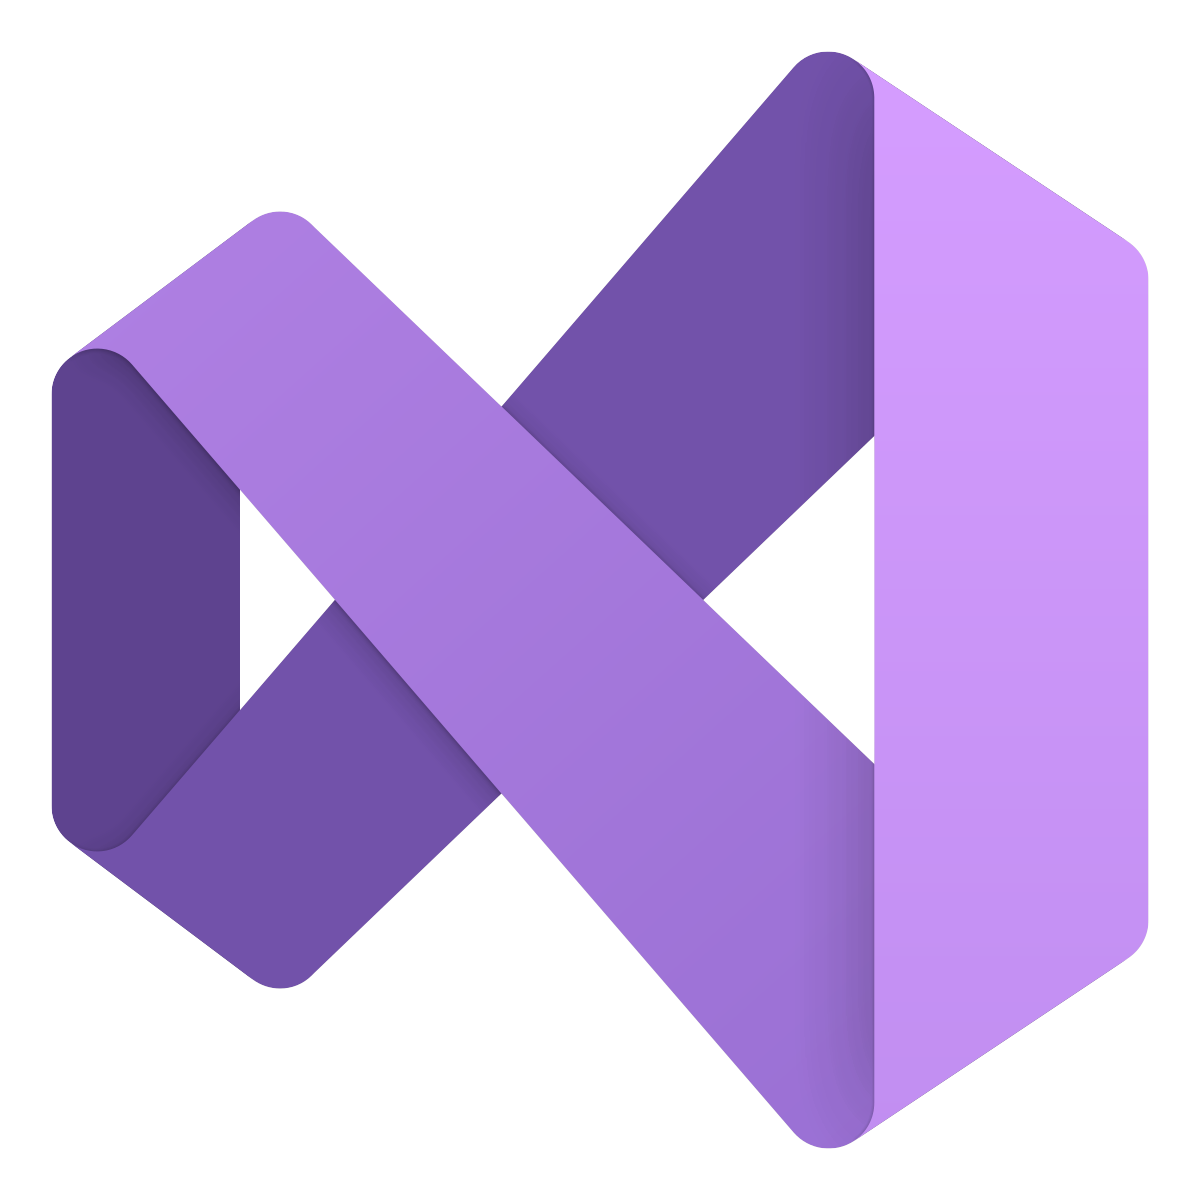 Microsoft Visual Studio: The primary software used for programming, debugging, and building applications.
Windows Operating System: The platform on which Visual Studio runs and operates.